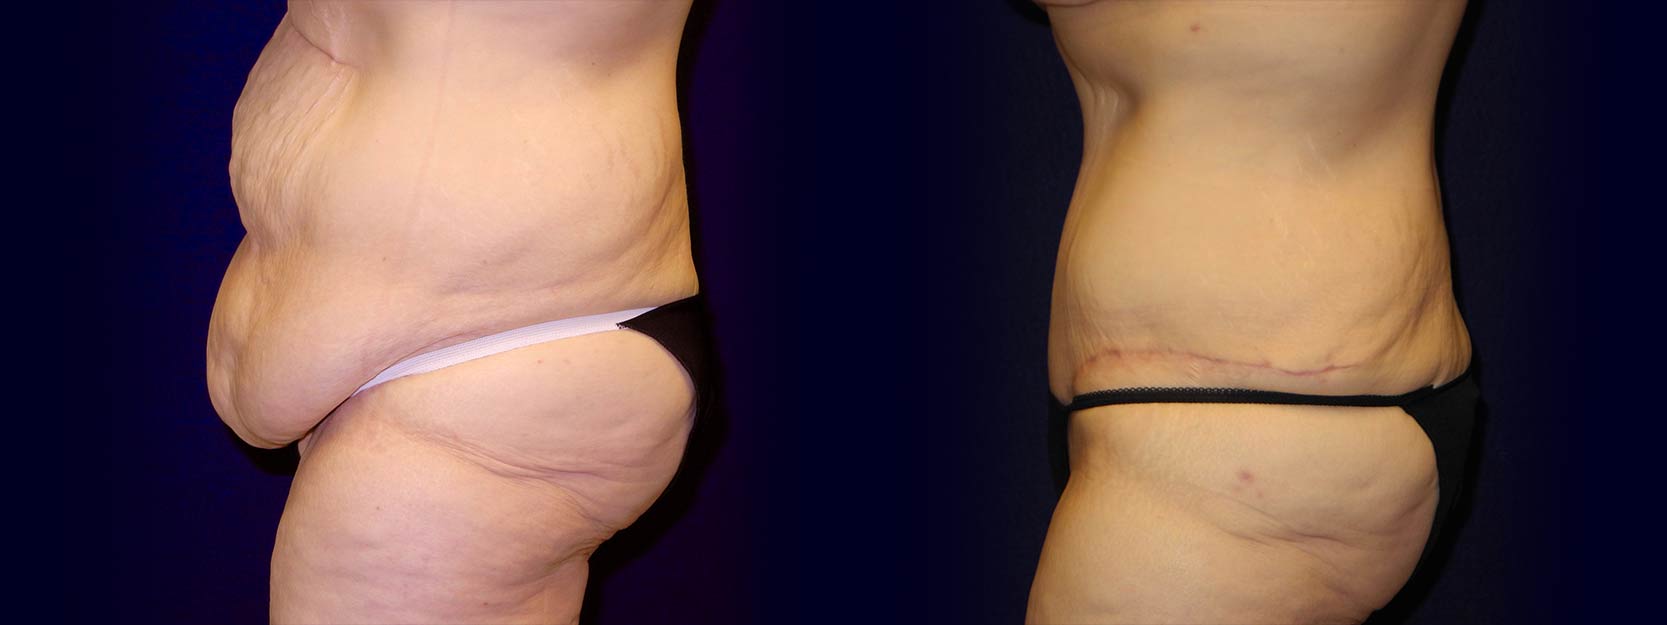 Left Profile View - Tummy Tuck After Weight Loss